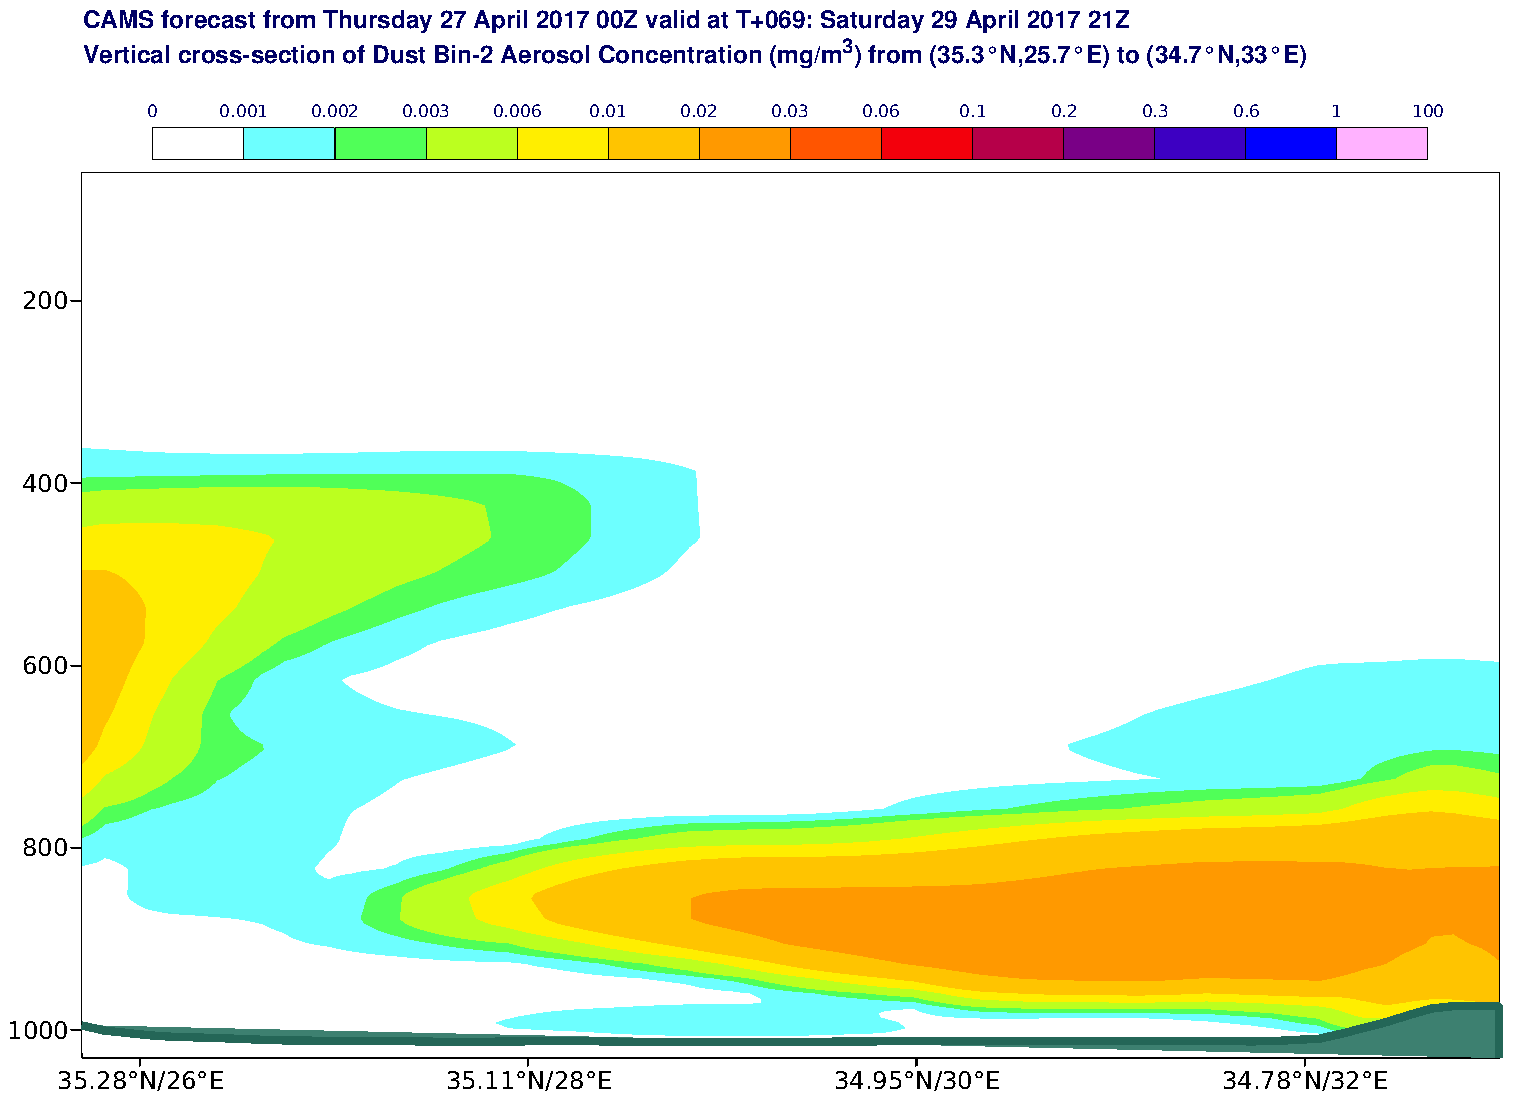 Vertical cross-section of Dust Bin-2 Aerosol Concentration (mg/m3) valid at T69 - 2017-04-29 21:00